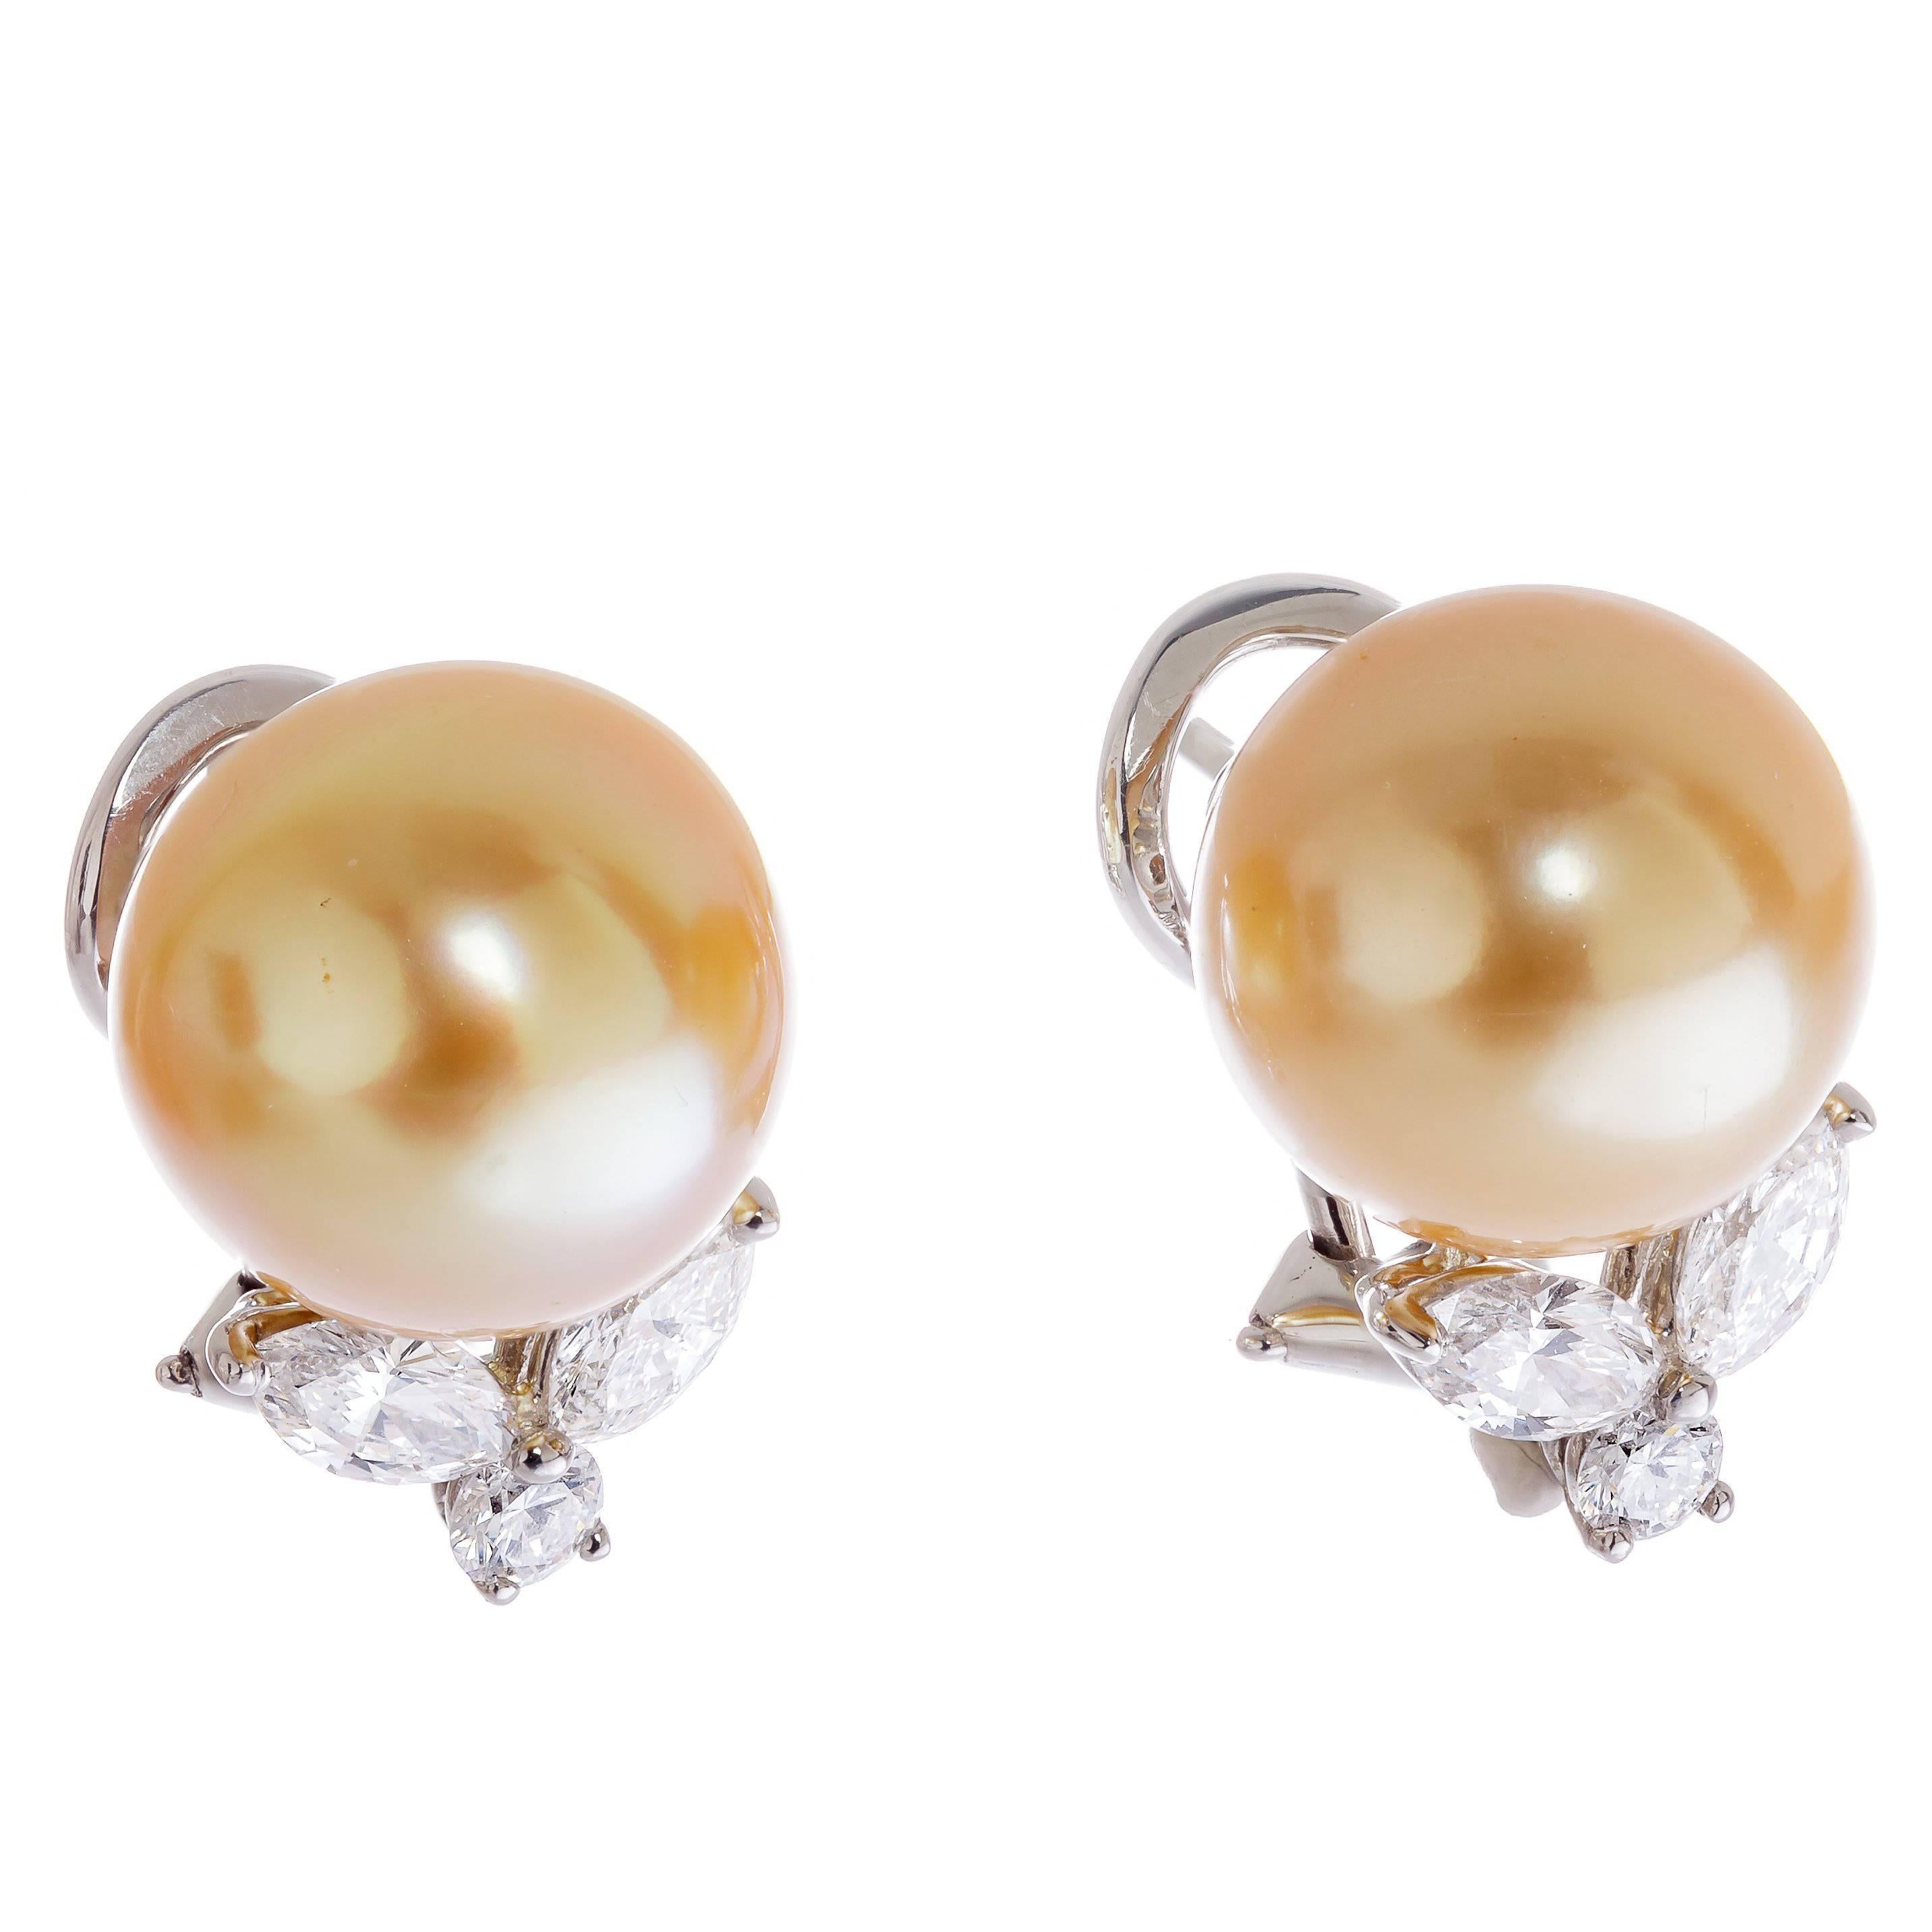 Tiffany & Co. Platinum Cultured Golden South Sea Pearl and Diamond Emma Earrings